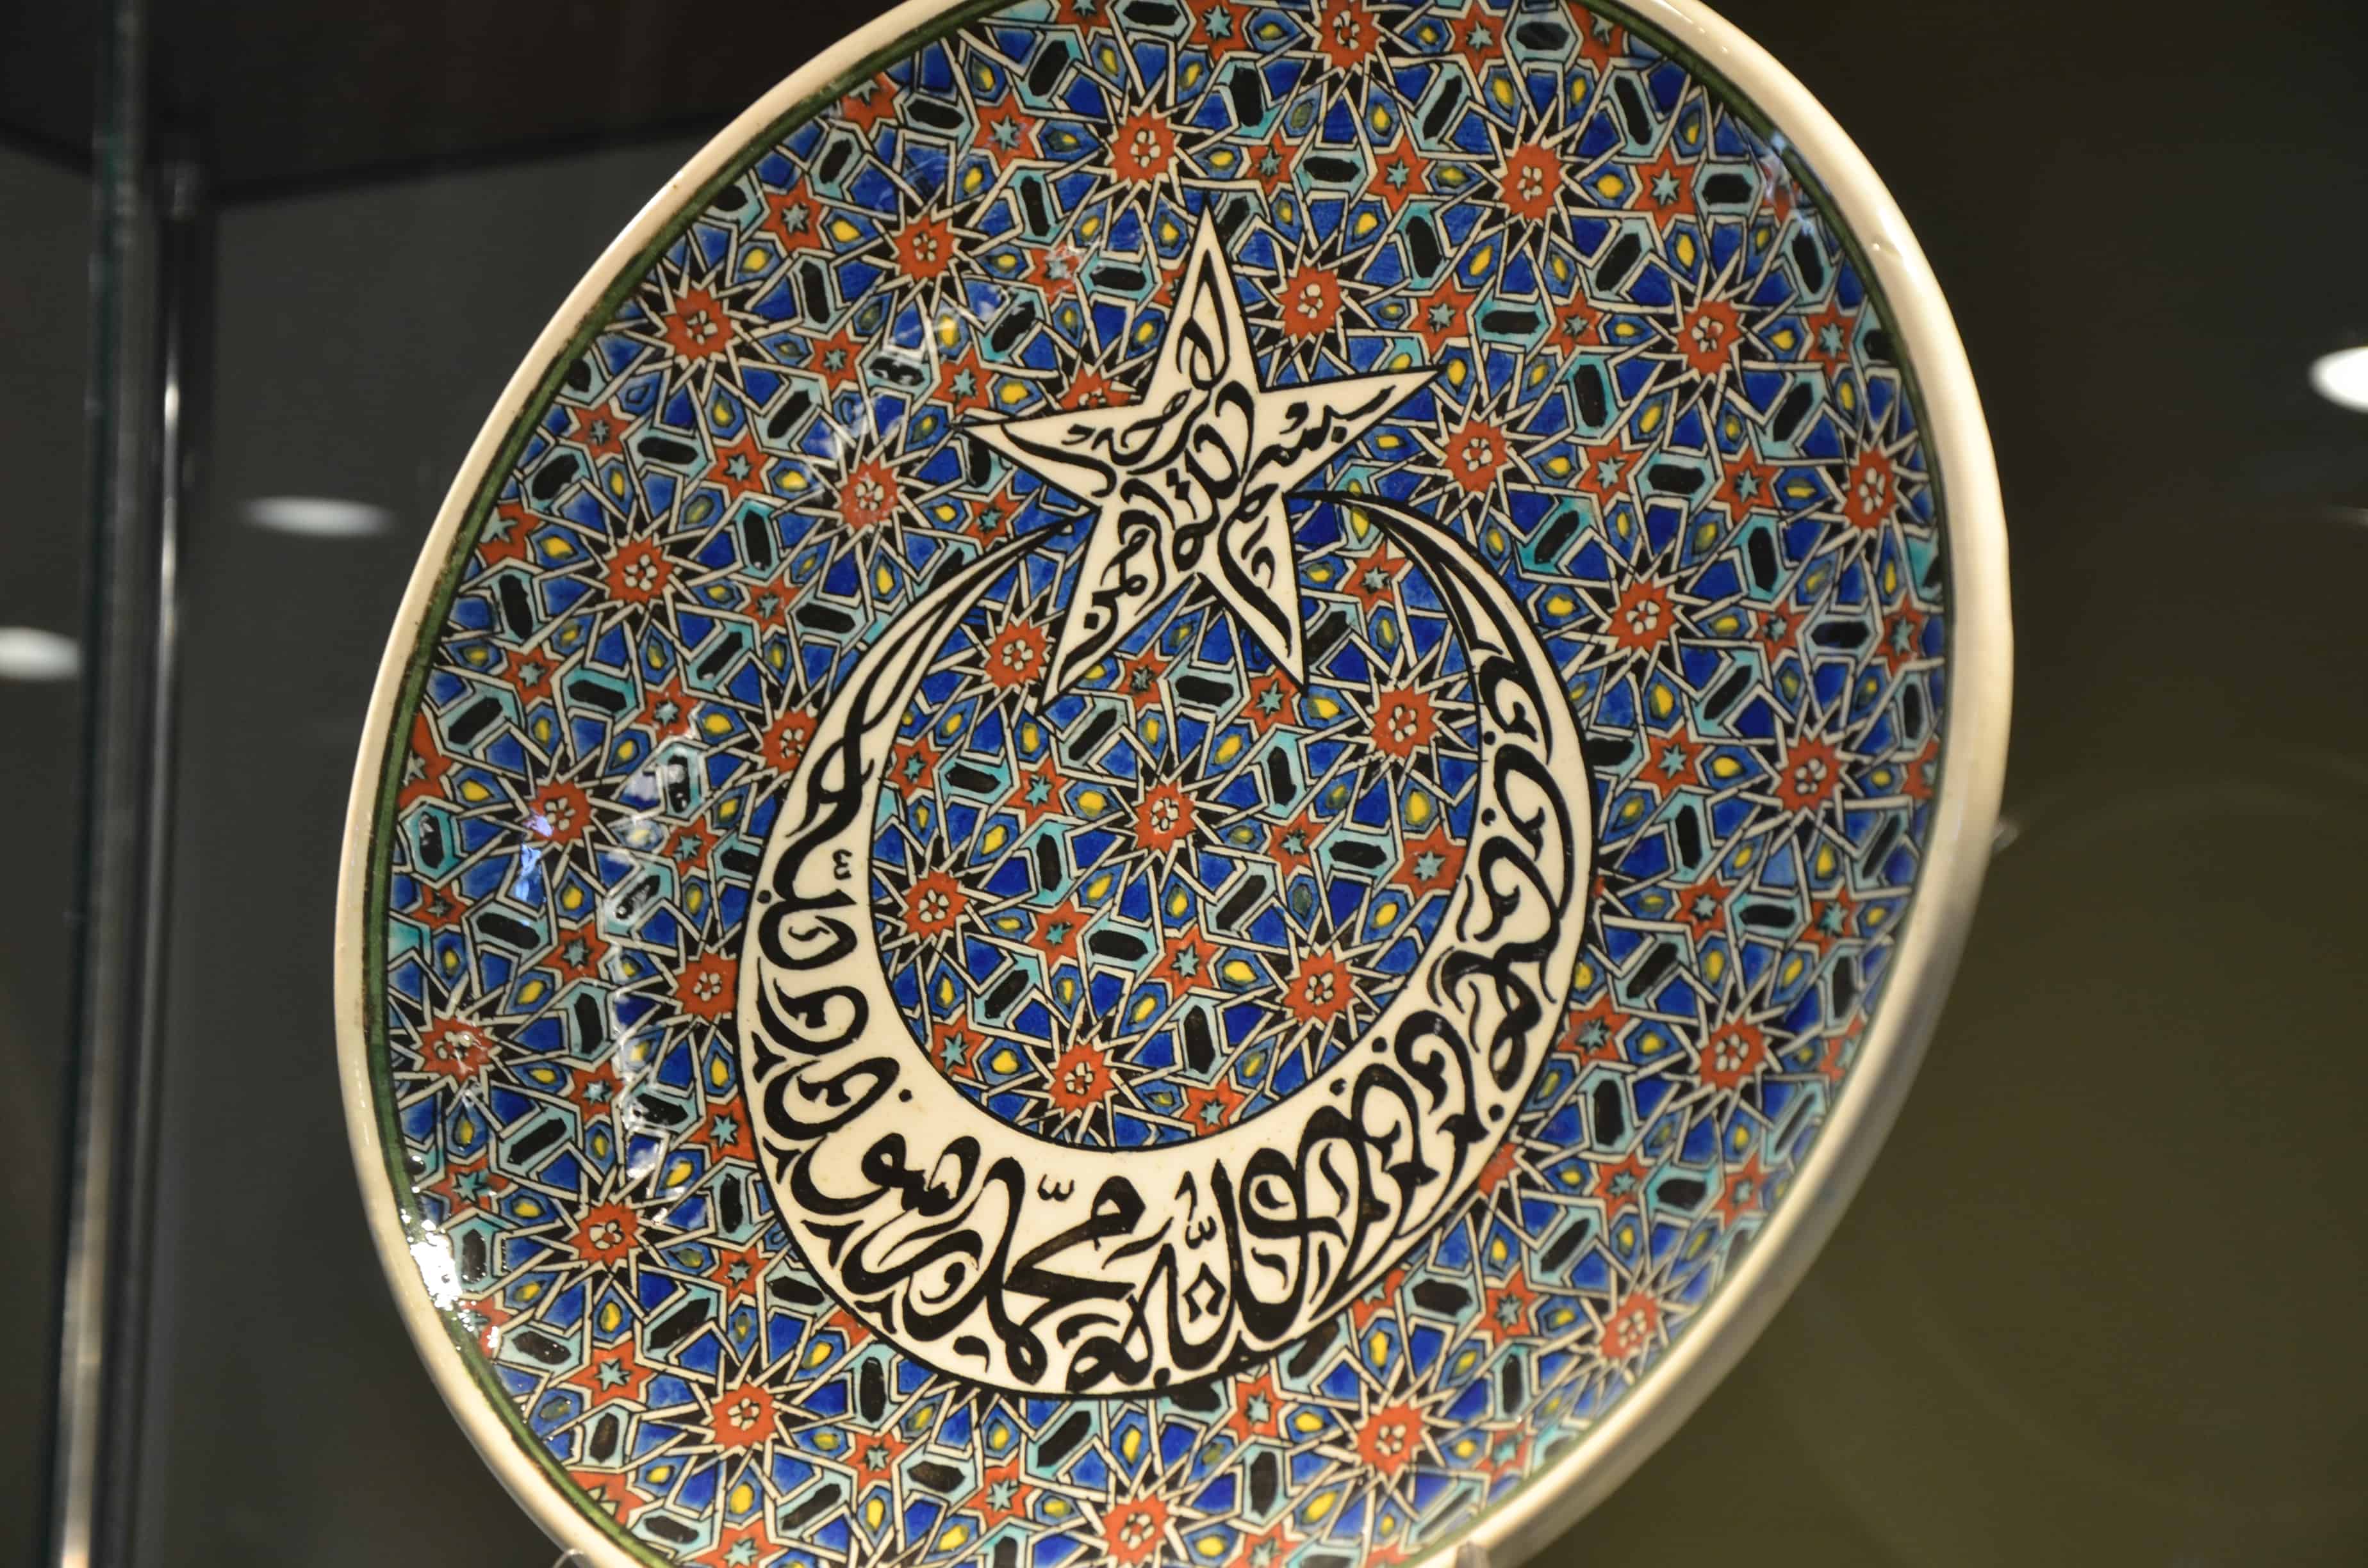 Calligraphy and geometric designs on a decorative plate